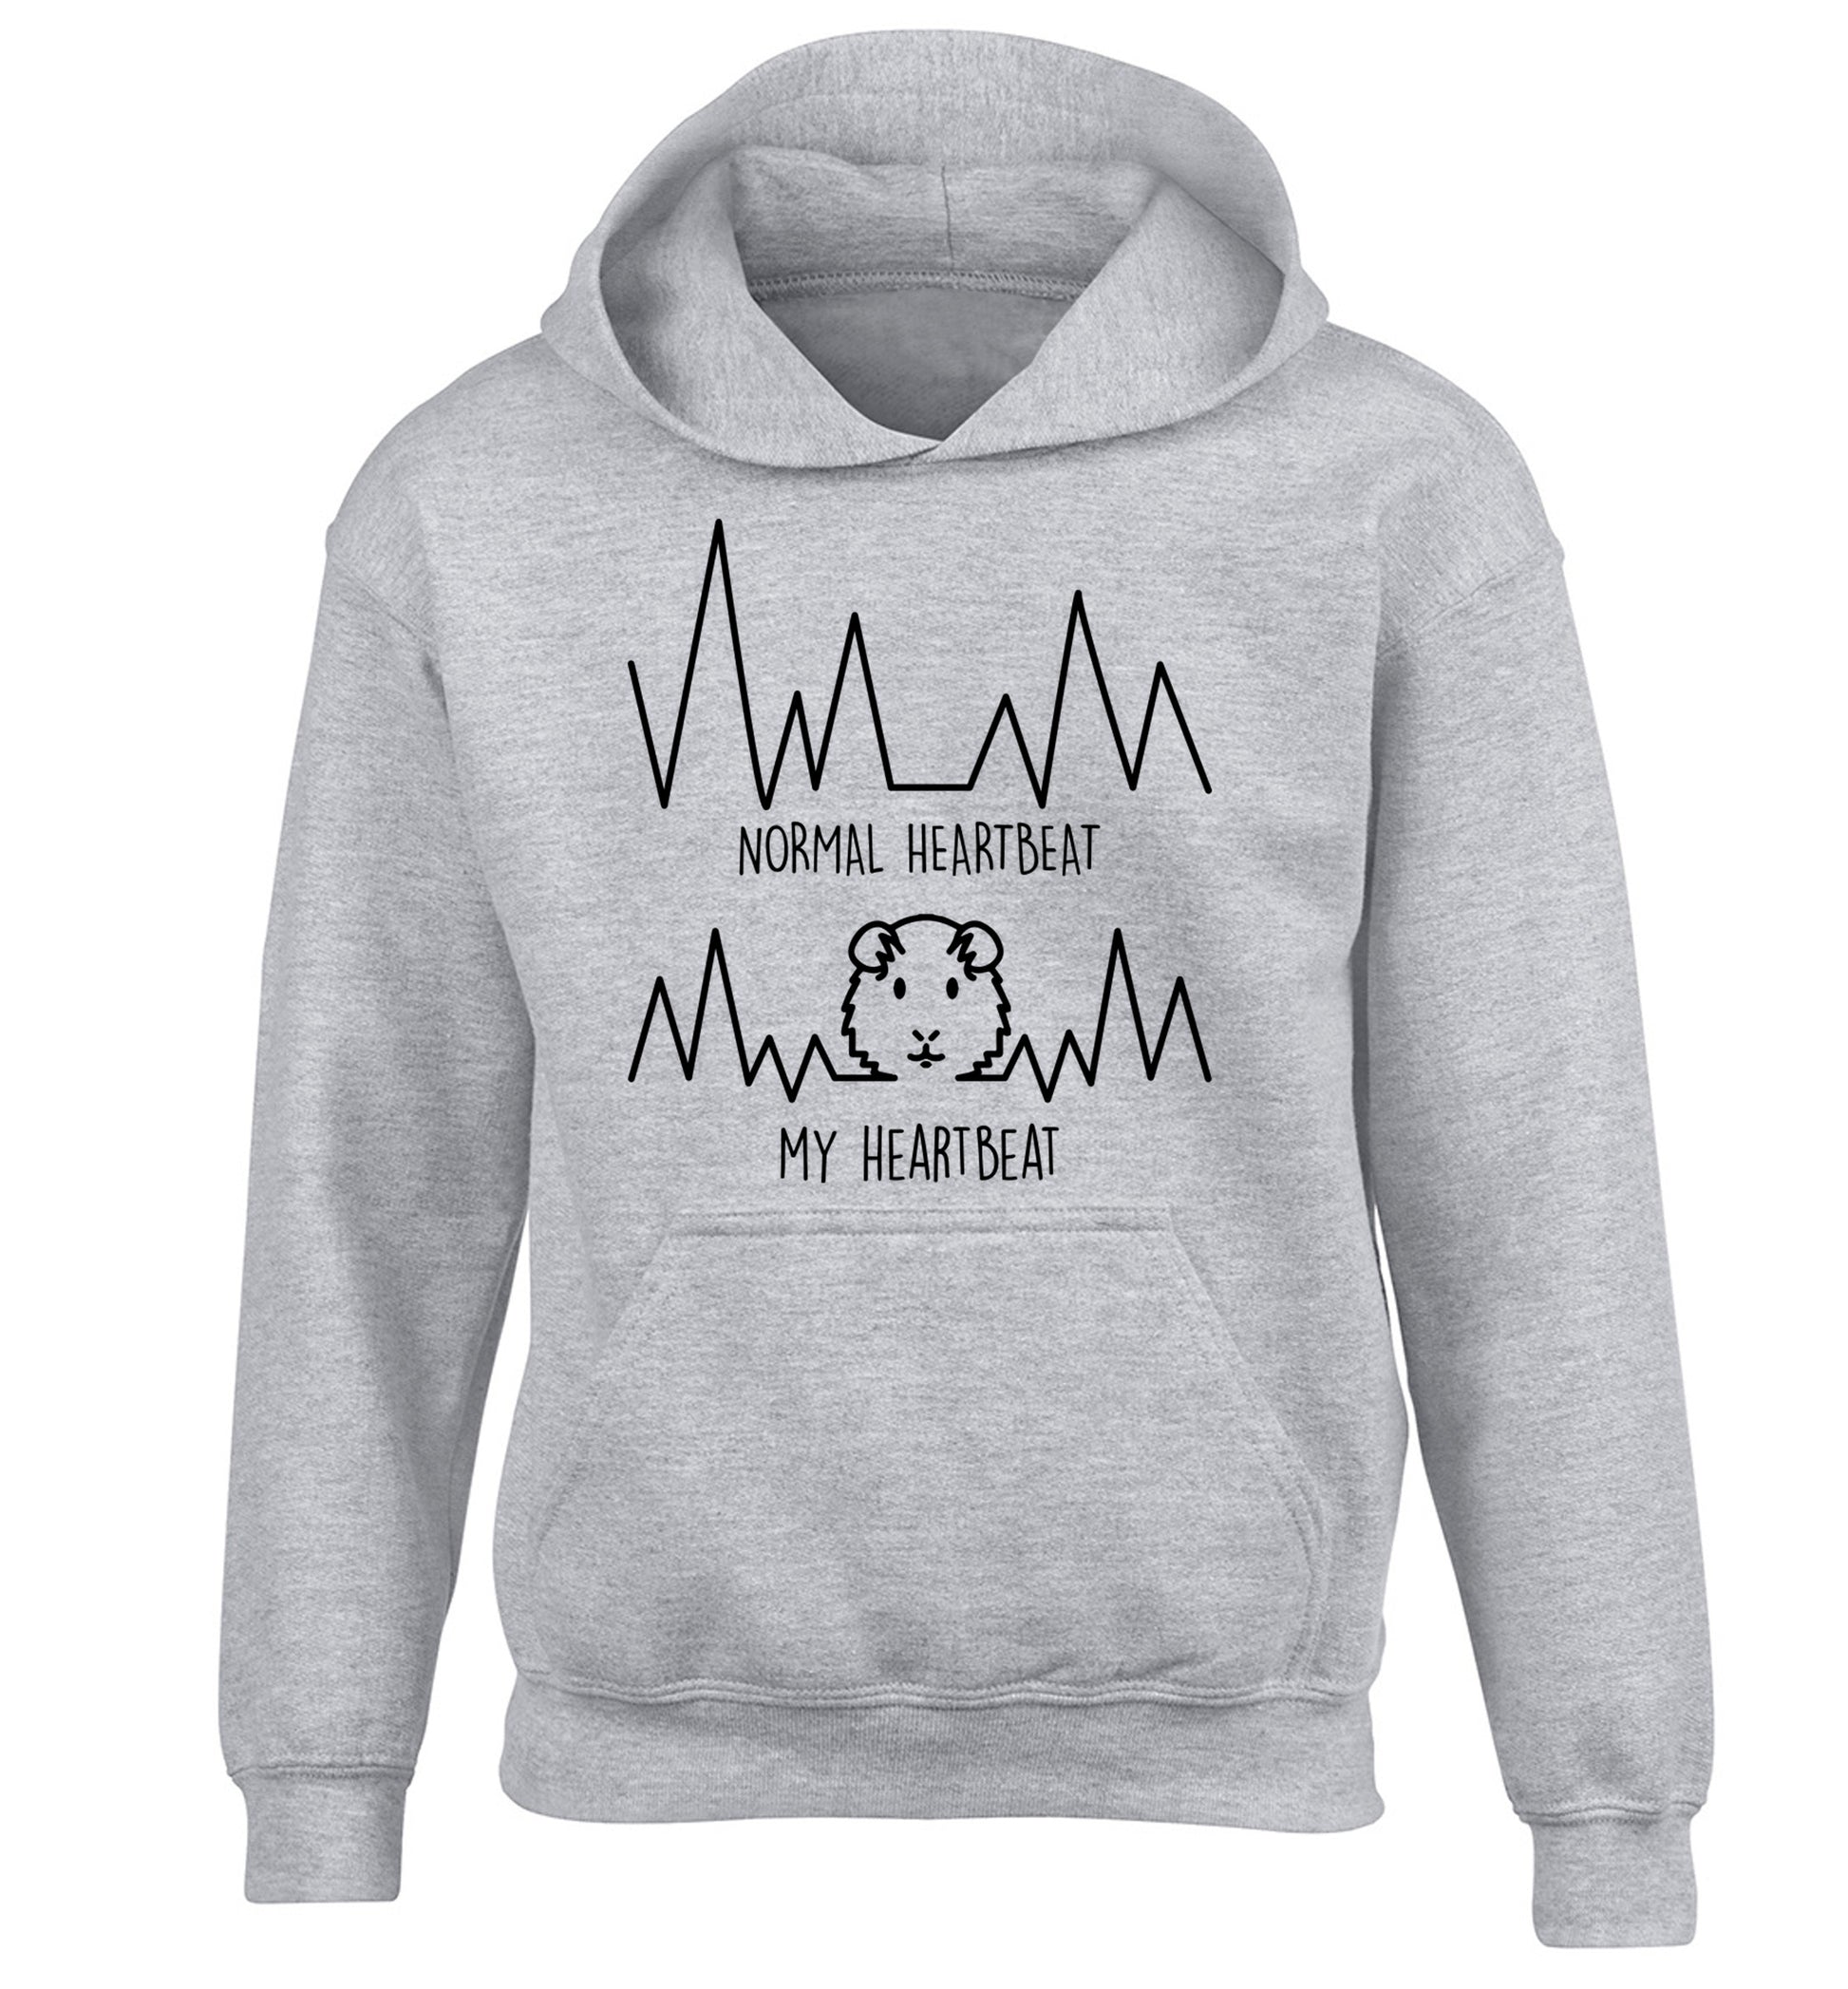 Normal heartbeat vs my heartbeat guinea pig lover children's grey hoodie 12-14 Years